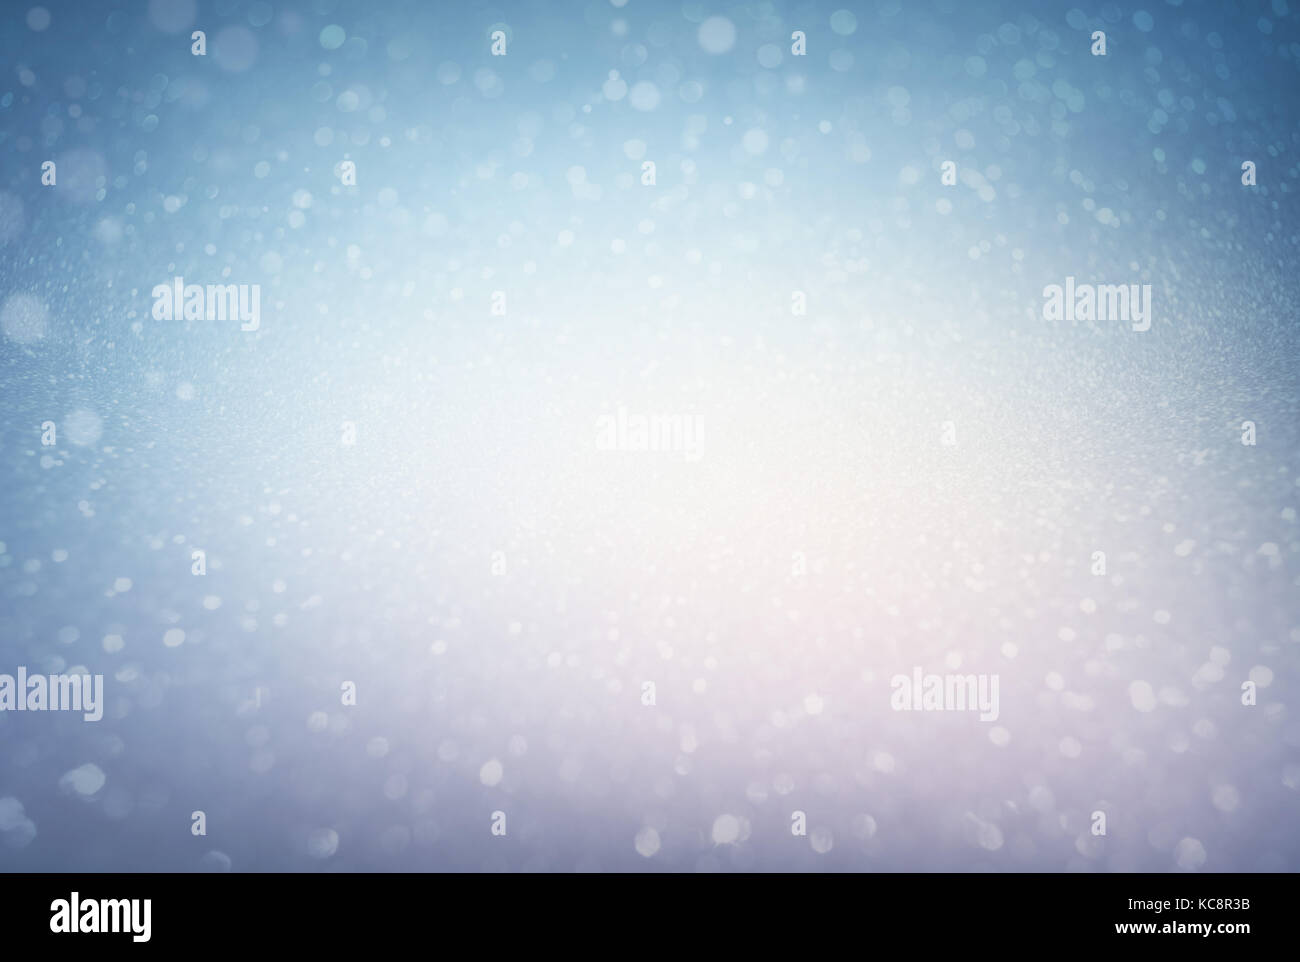 Glittering defocused icy blue background - Festive material Stock Photo